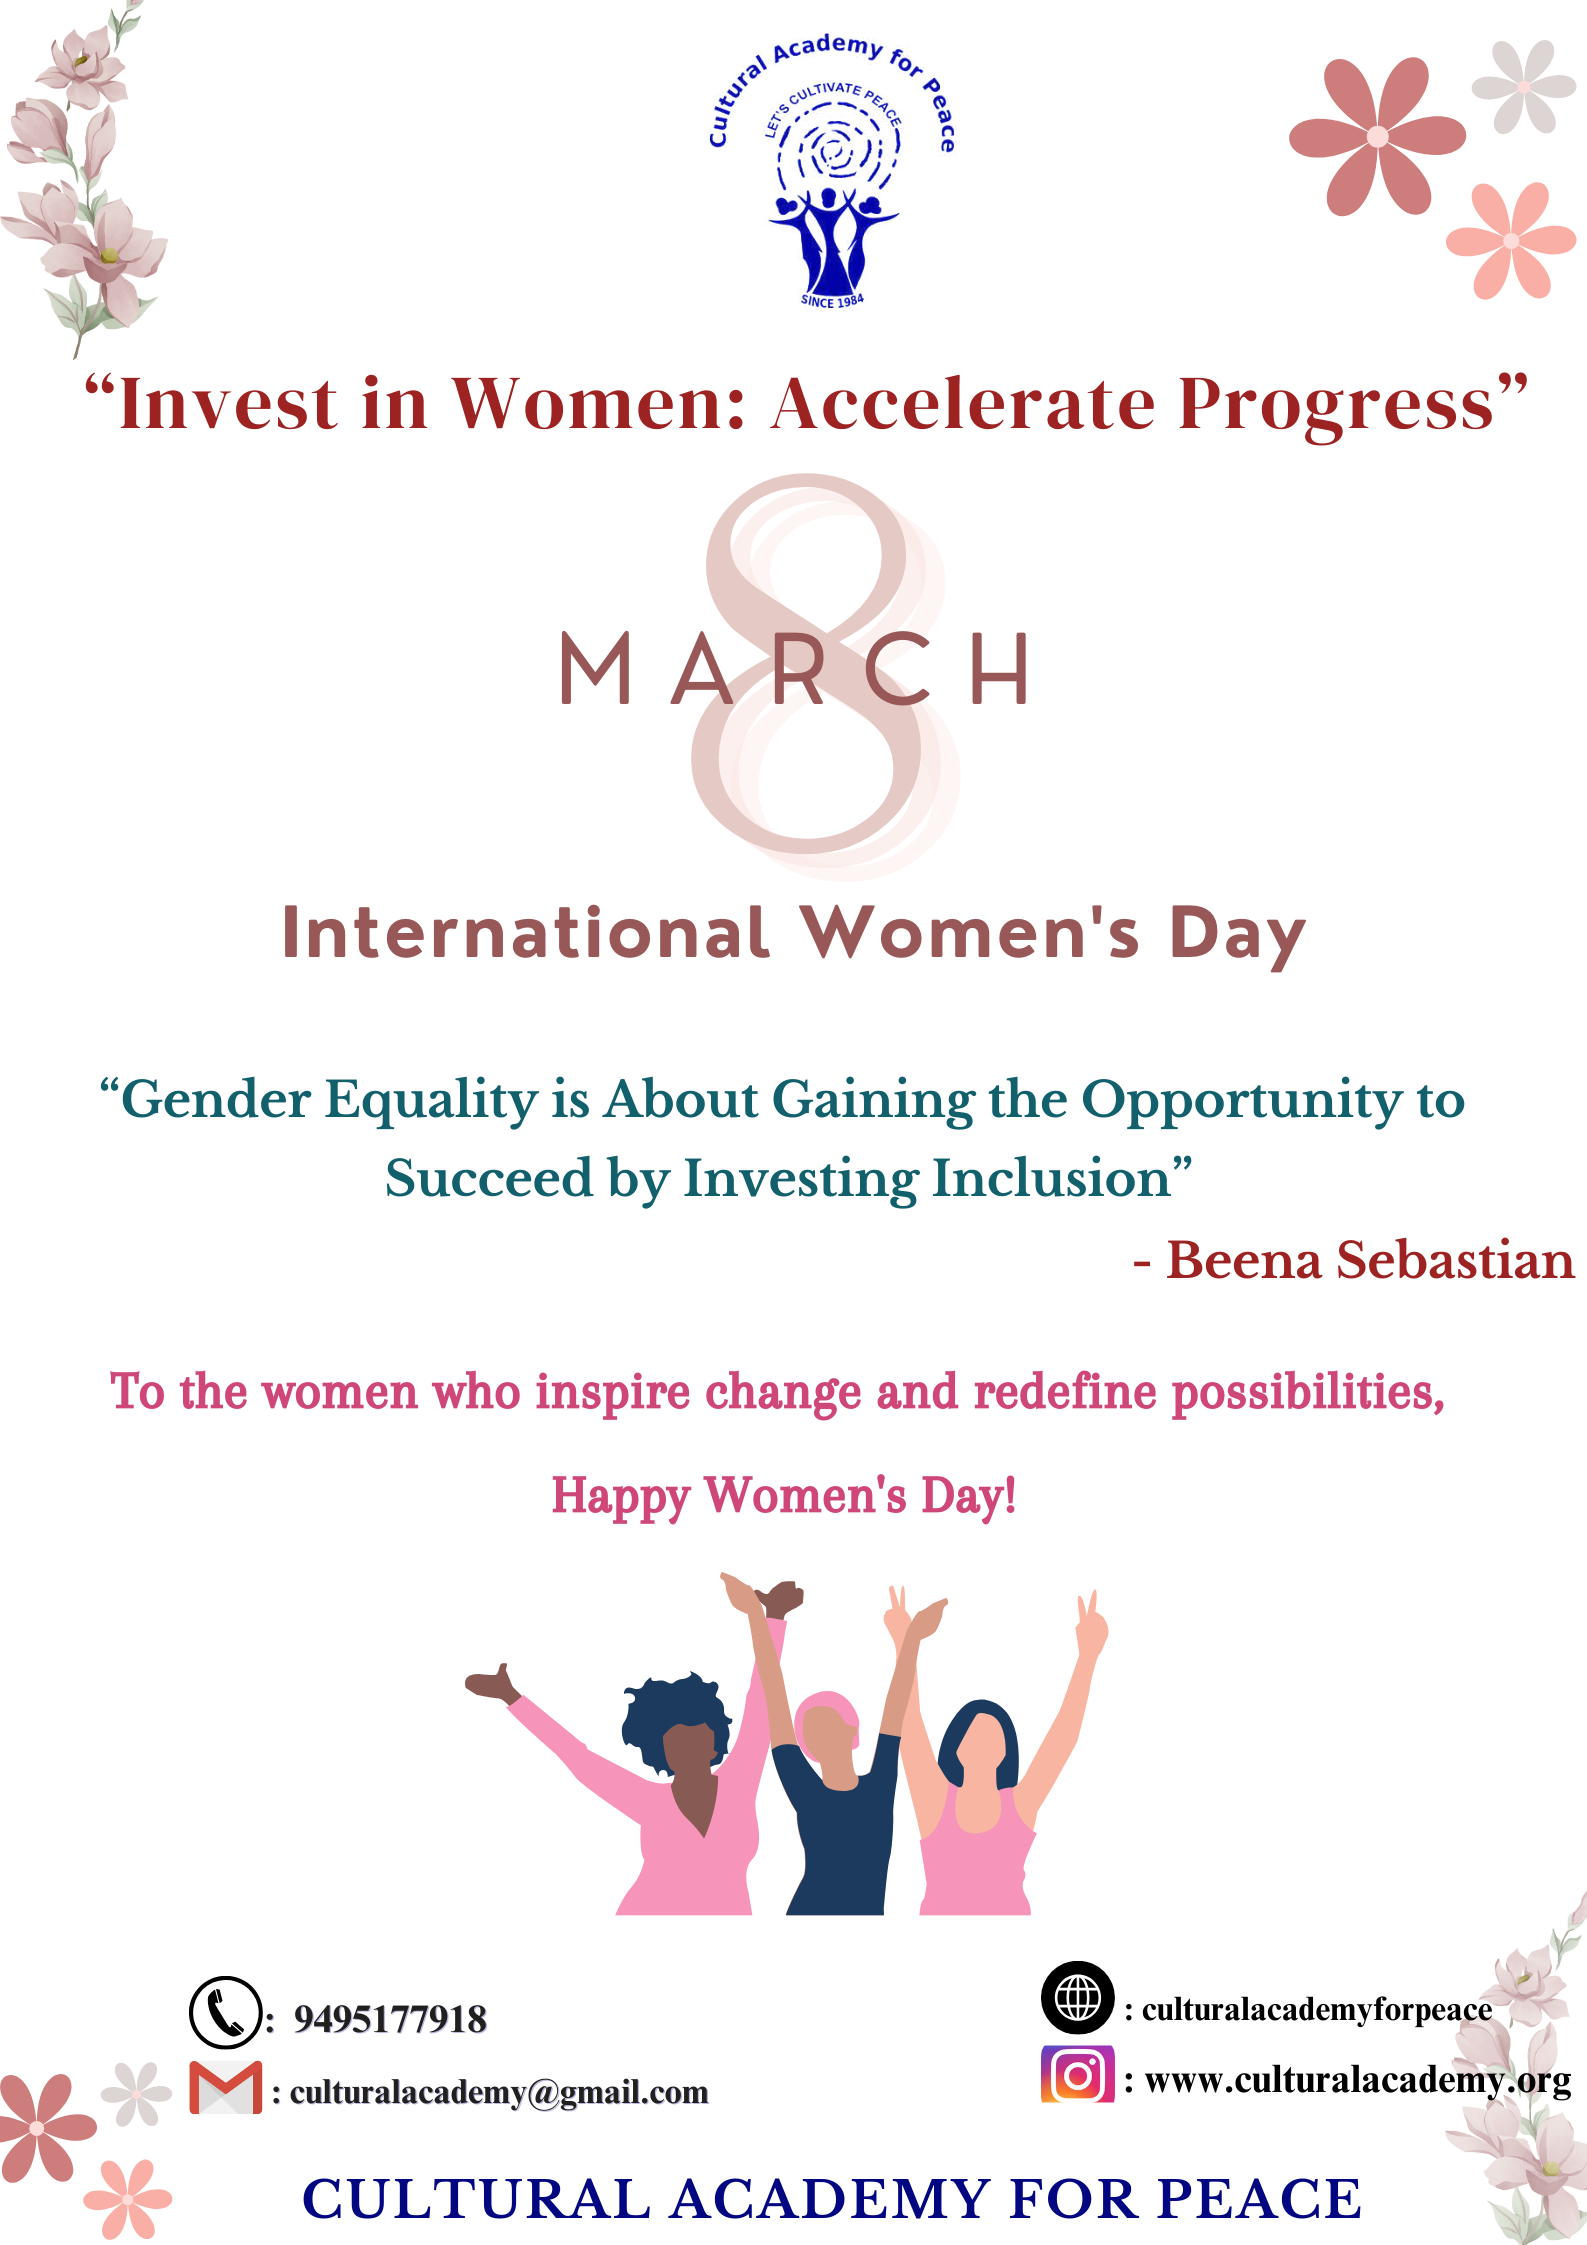 “Gender Equality is About Gaining the Opportunity to Succeed by Investing Inclusion”  – Beena Sebastian